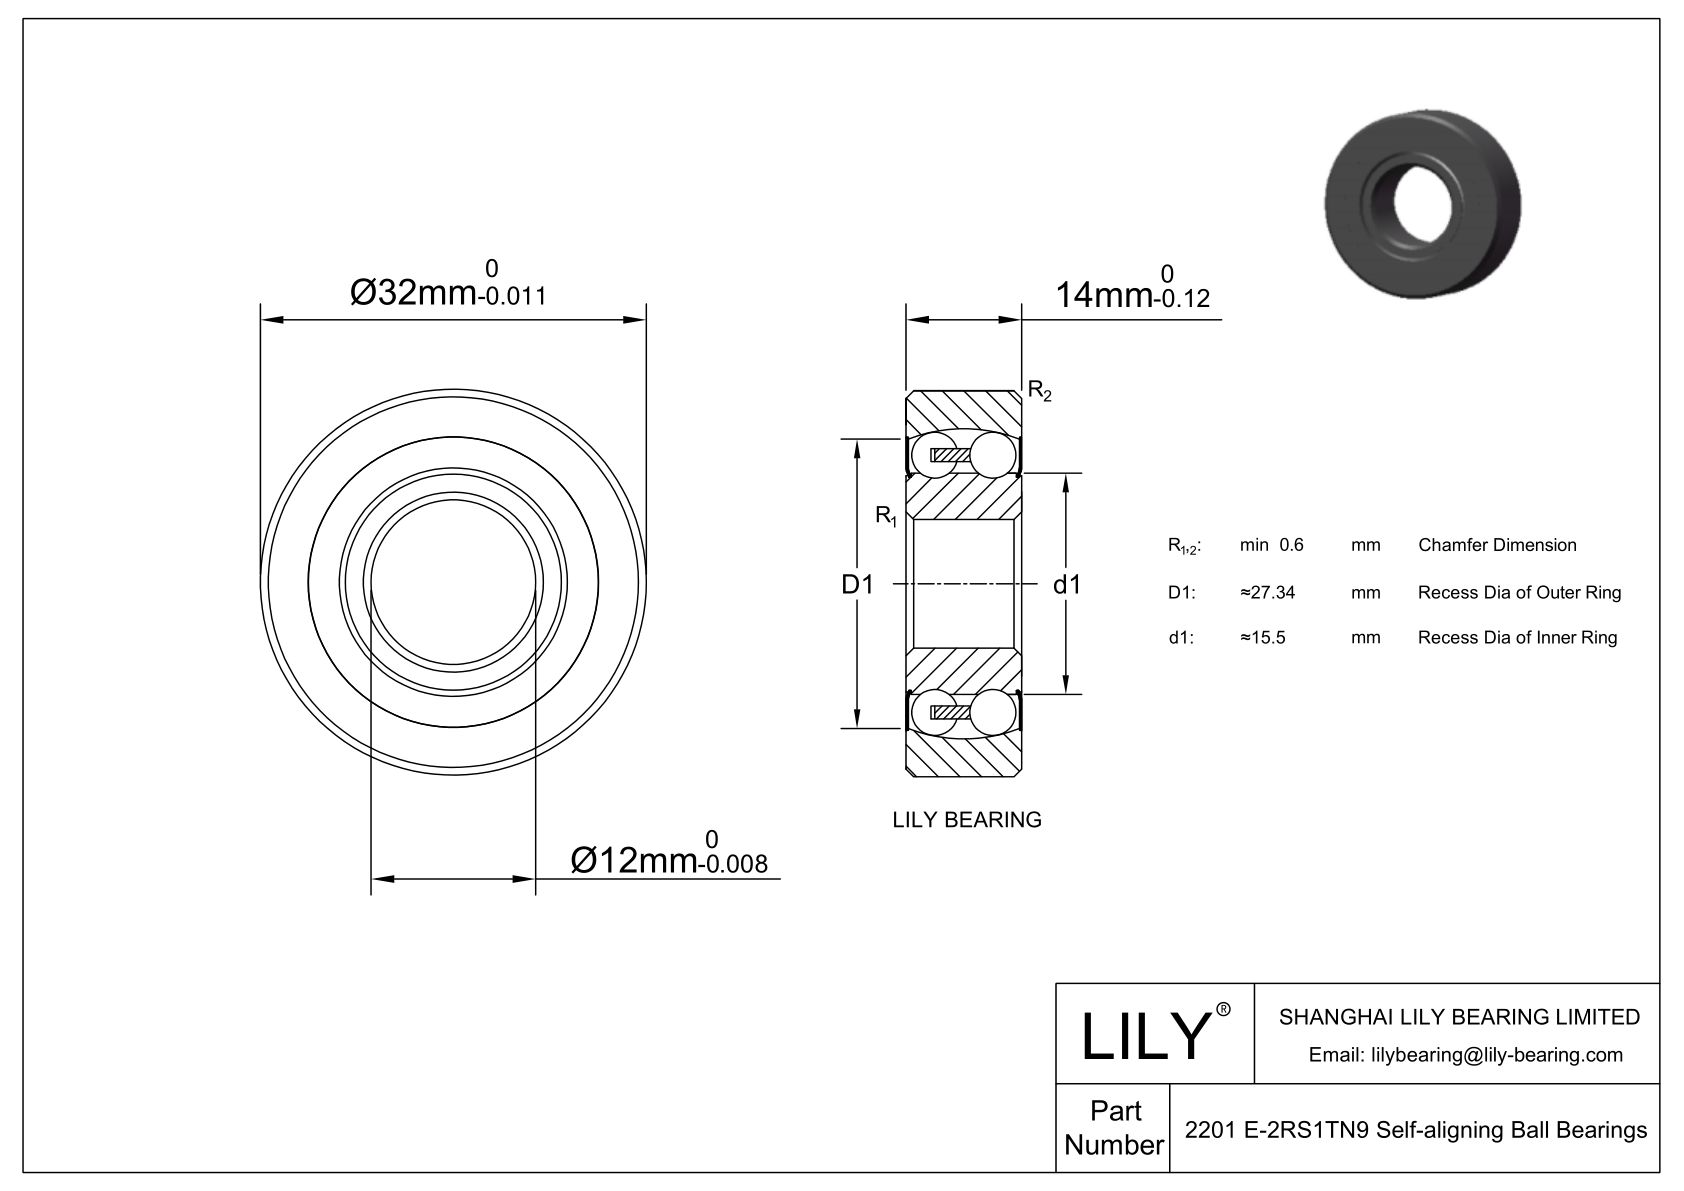 CE2201 E-SIPP Silicon Nitride Self Aligning Ball Bearings cad drawing